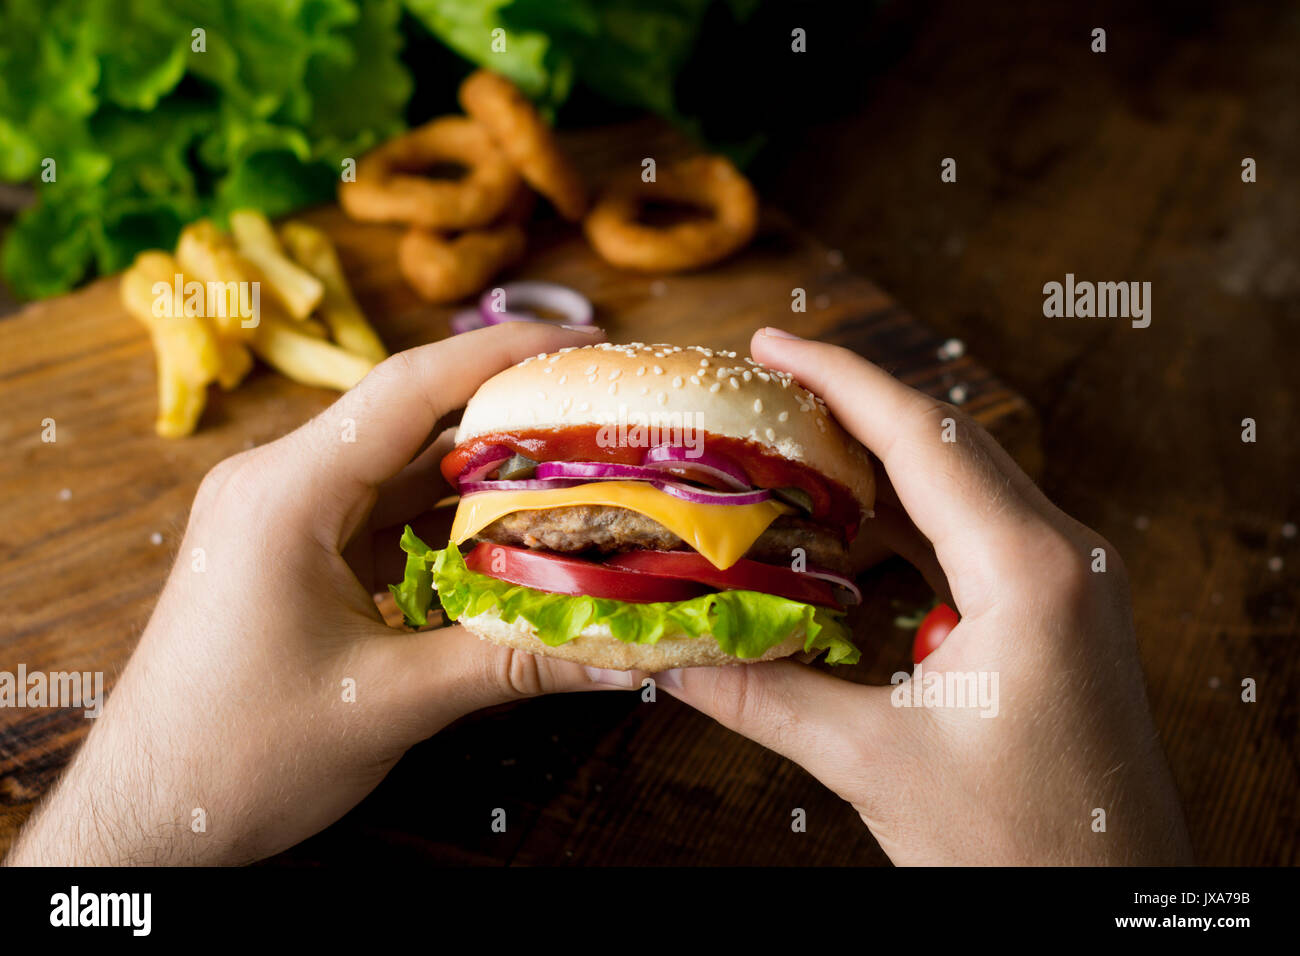 Cheeseburger. Man hands holding burger with cheese, red onion, tomatoes, lettuce green salad and pickles. Square crop. Closeup view, selective focus Stock Photo